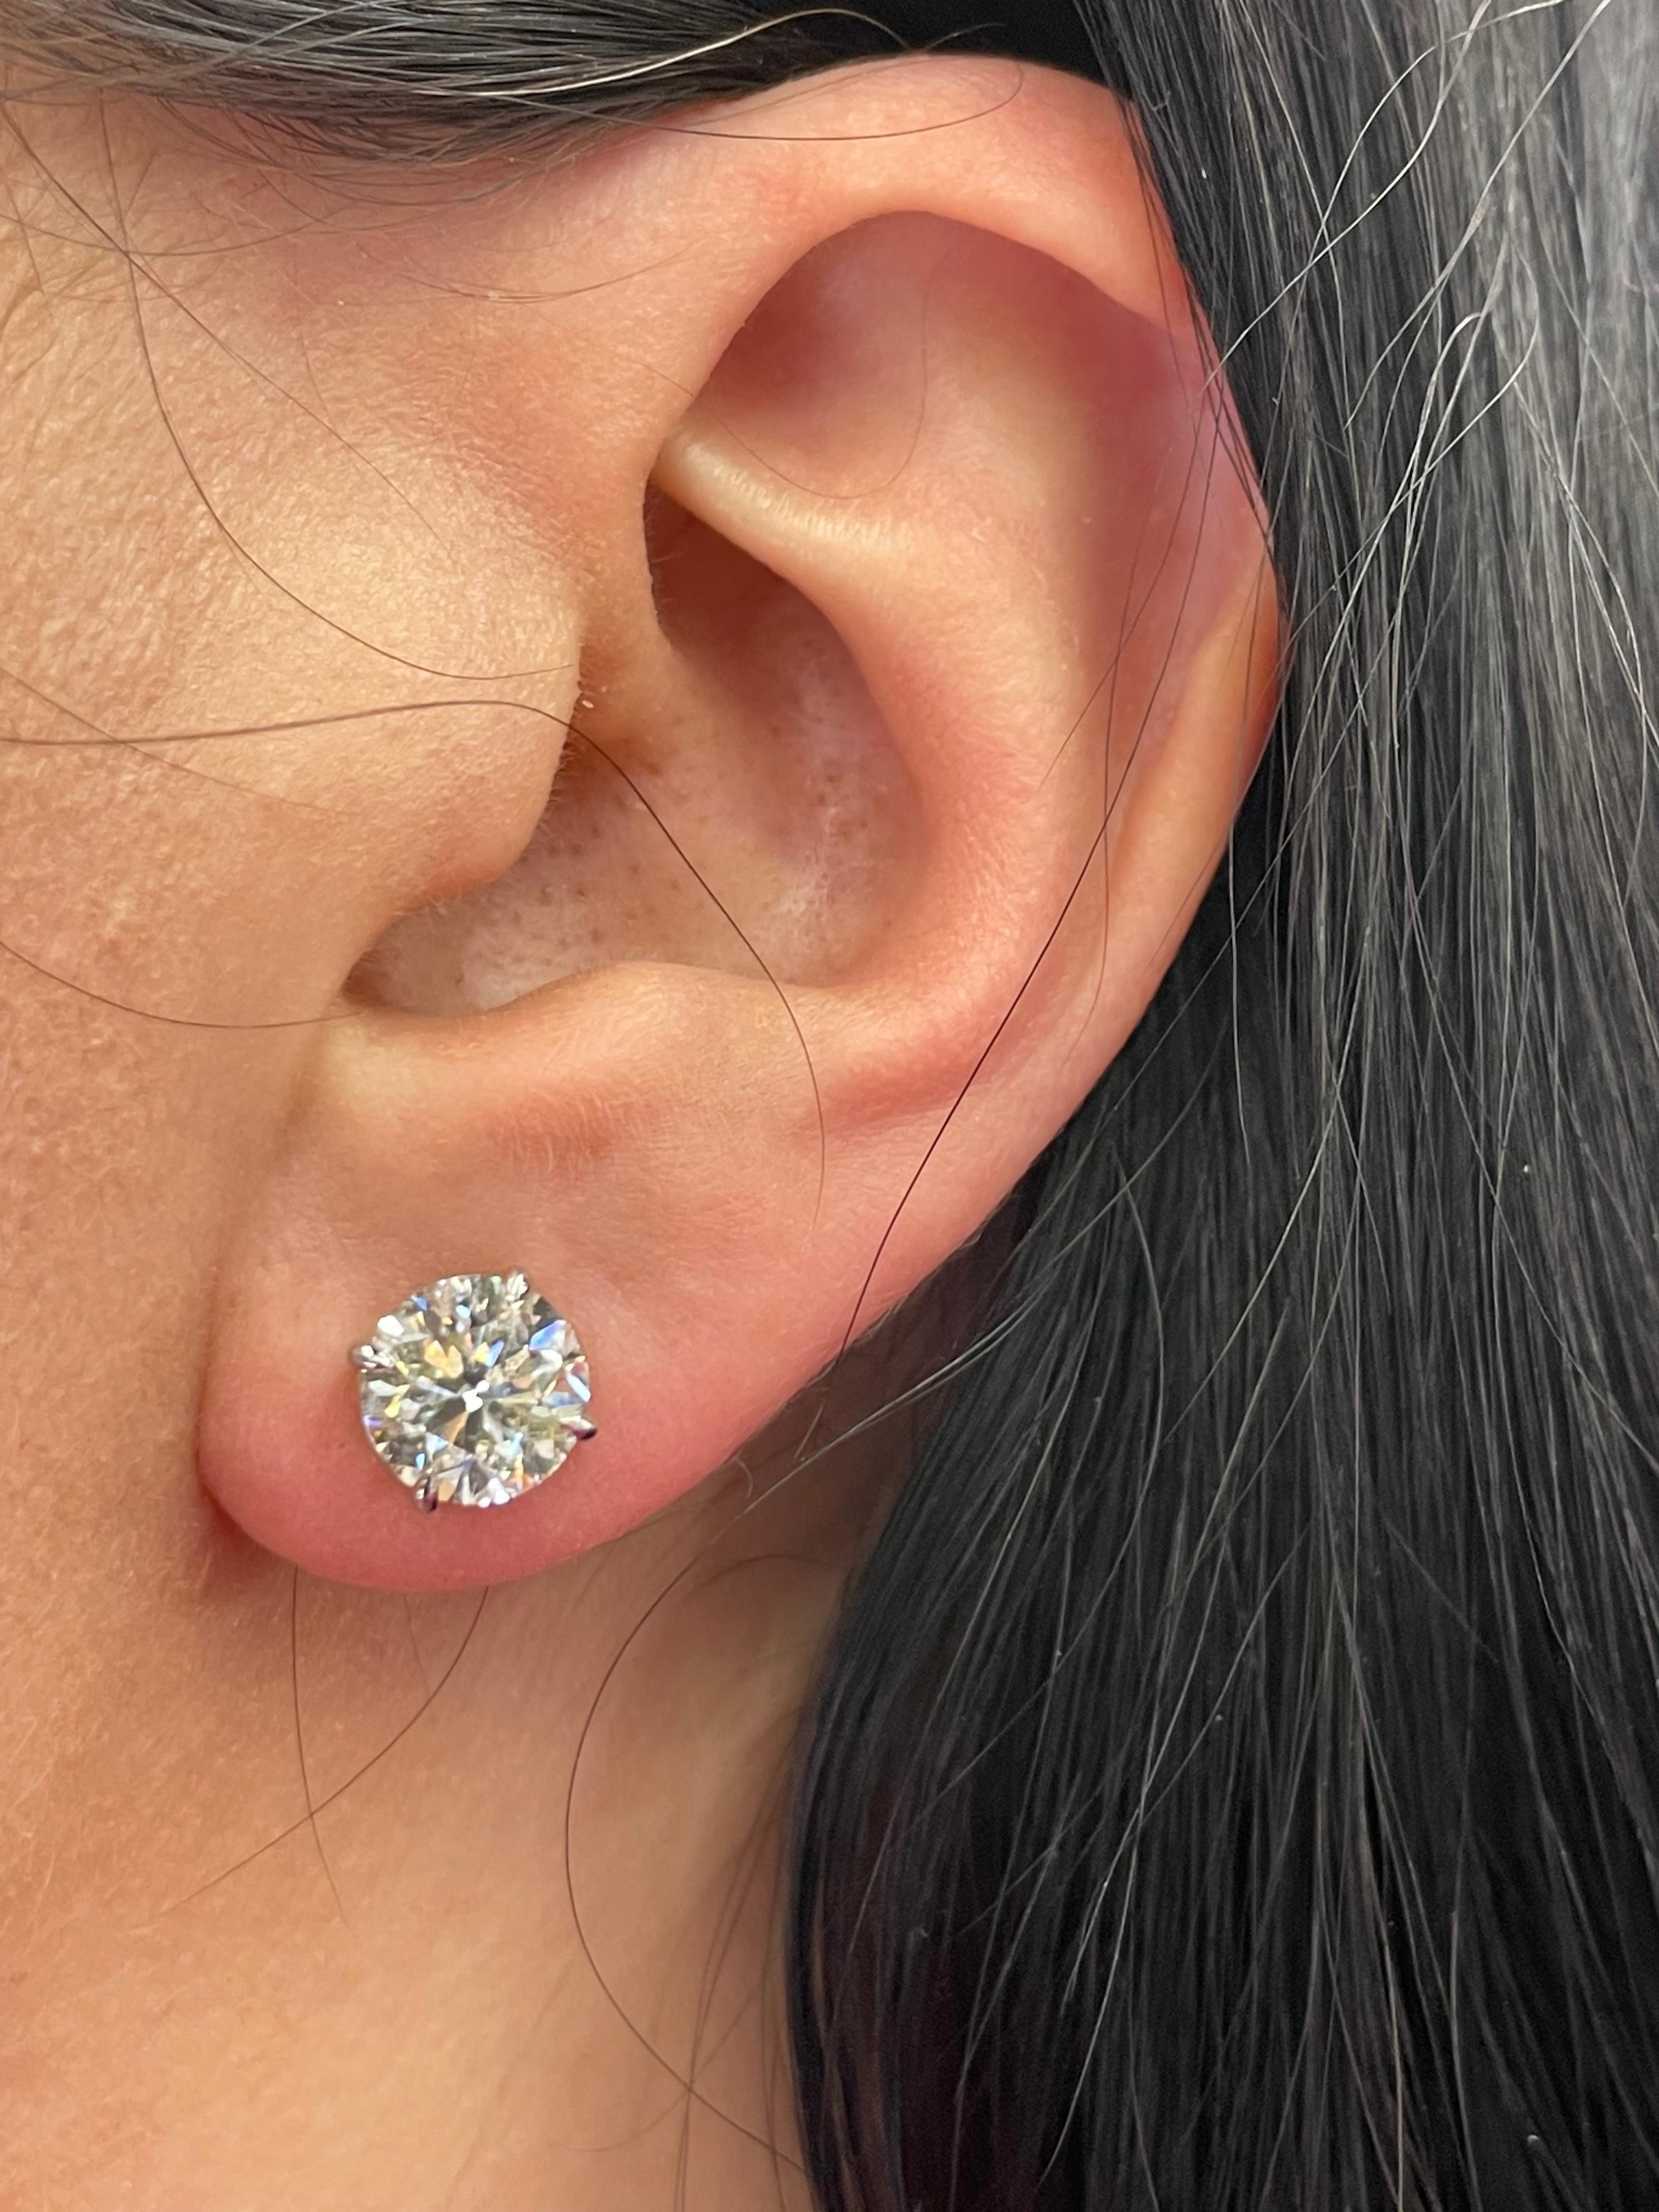 Diamond stud earrings weighing 4.04 Carats, Color J, Clarity I1, in 14 Karat White Gold 4 prong Basket setting. 
Face up Whiter than J, 7/10 Life 
Setting can be changed to a Basket, Martini or Champagne/ 3 or 4 Prong/ 14 or 18 Karat.

These